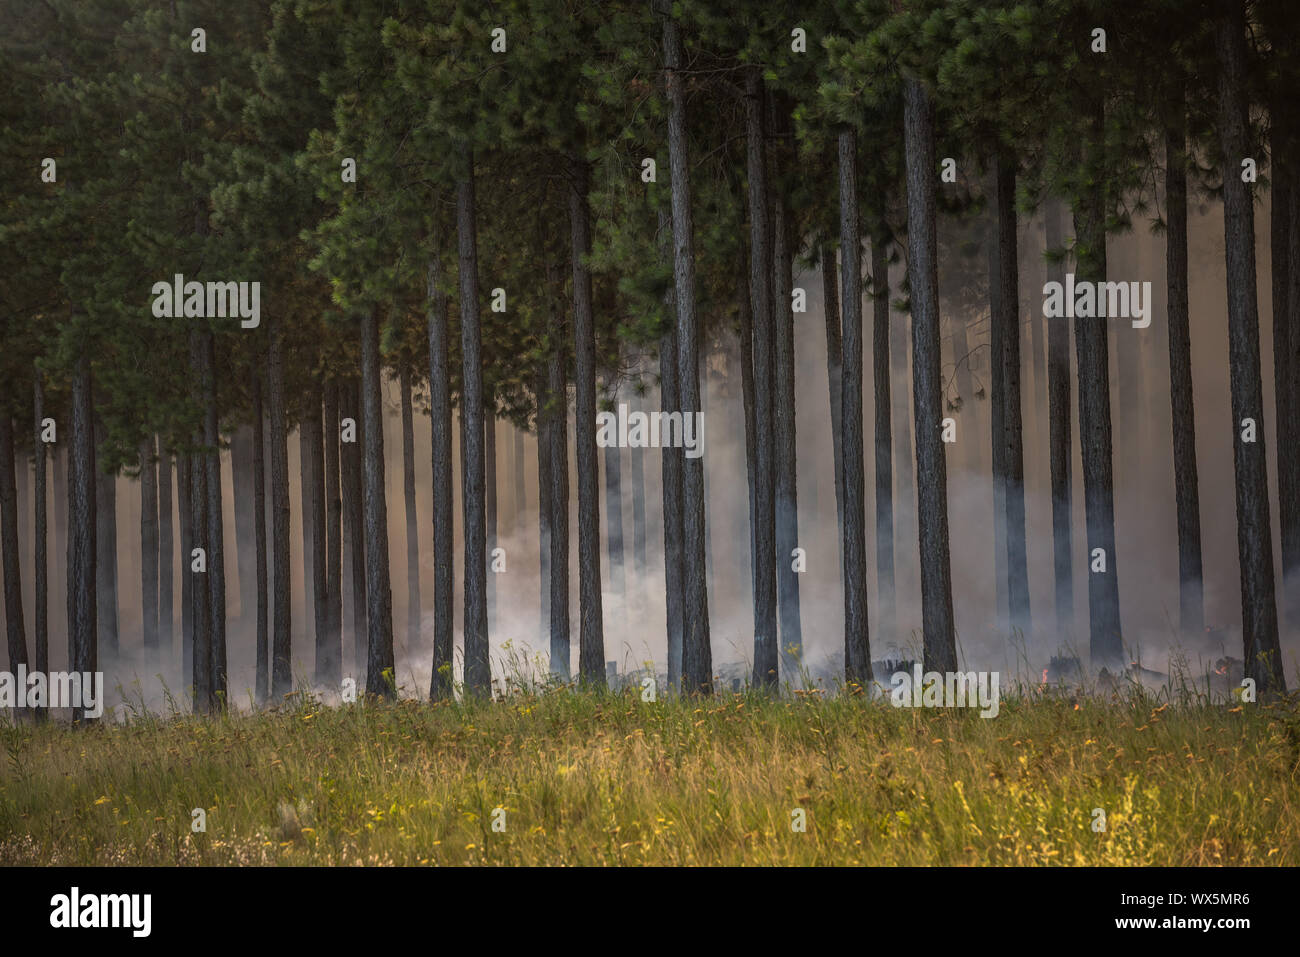 Wildfire, fire in a forest. Stock Photo